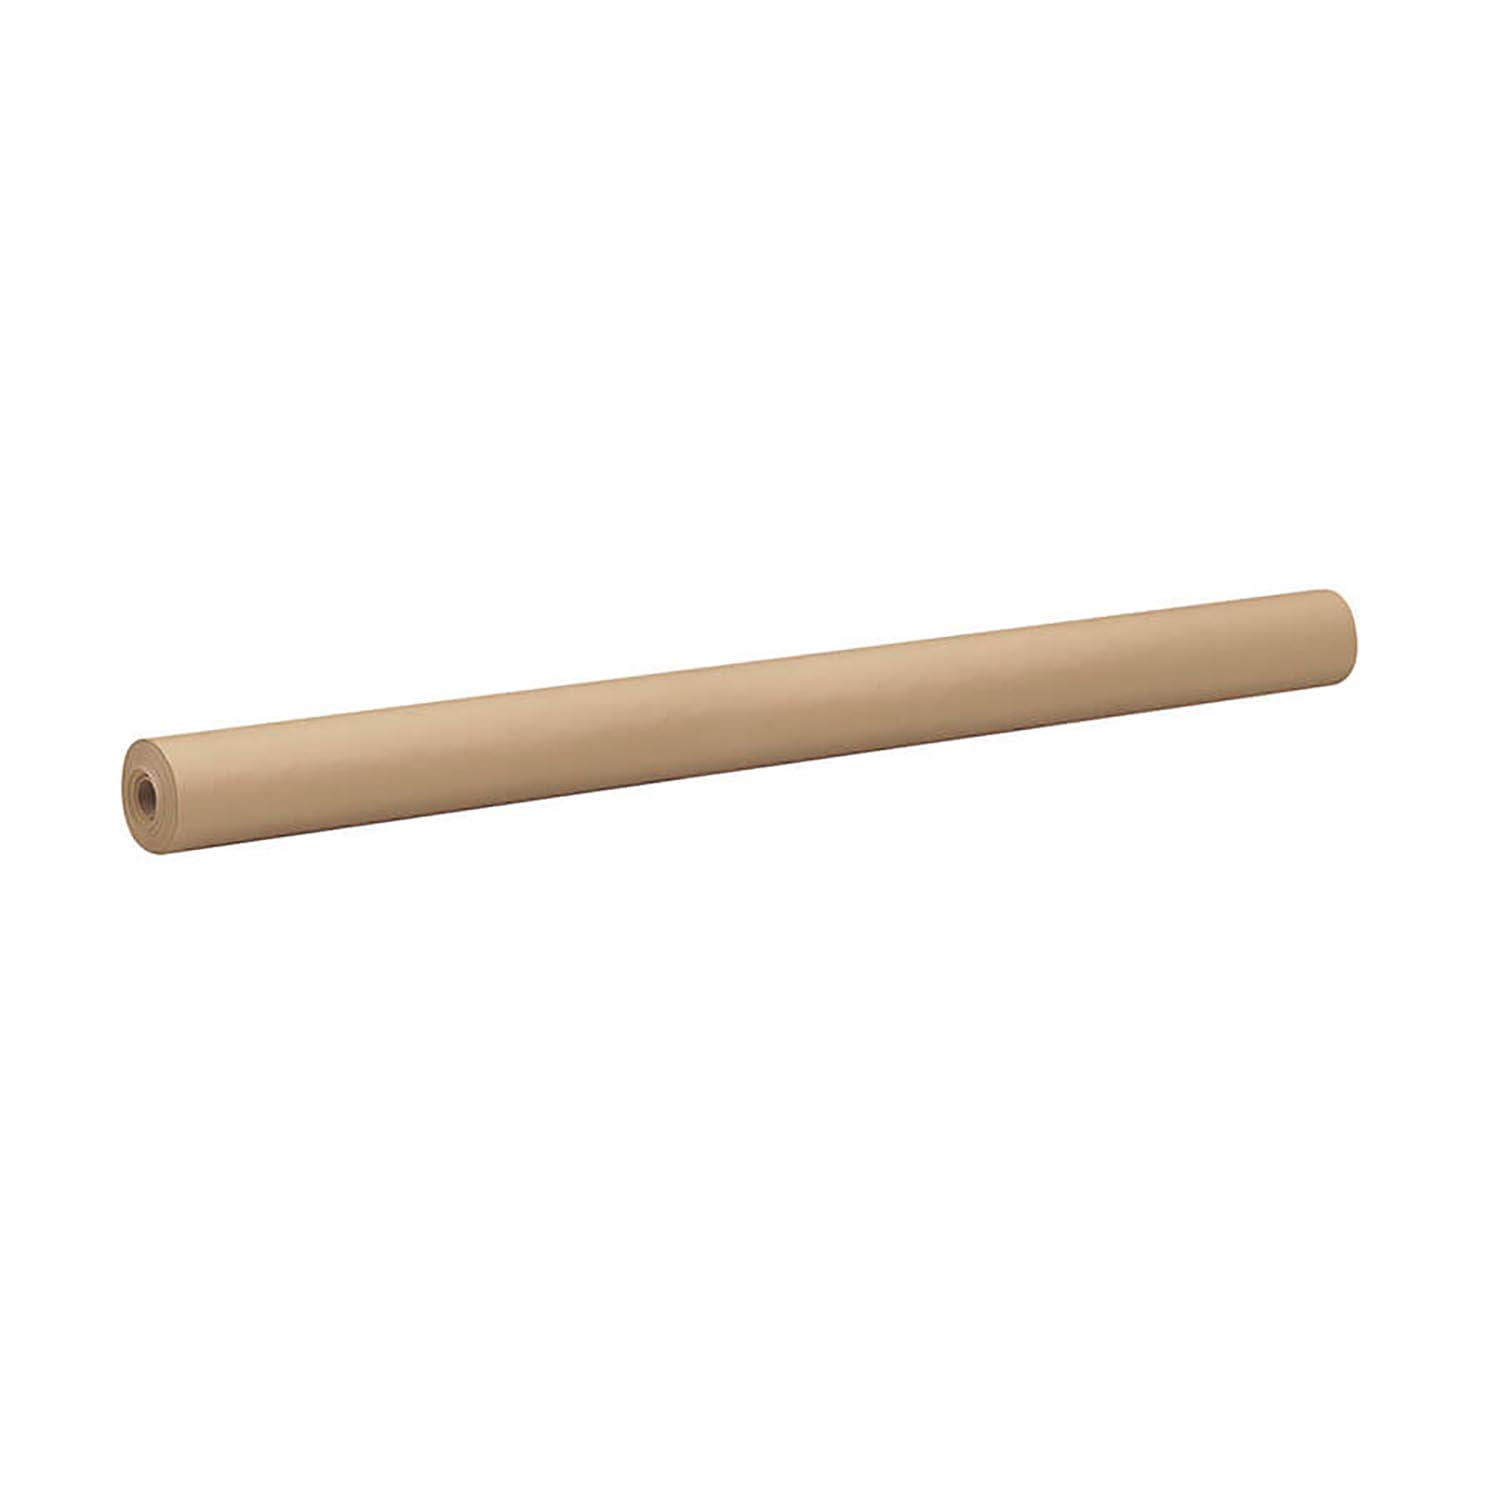 Pacon Kraft Paper Roll, 40 lb,36 Inches x 100 Feet, Natural